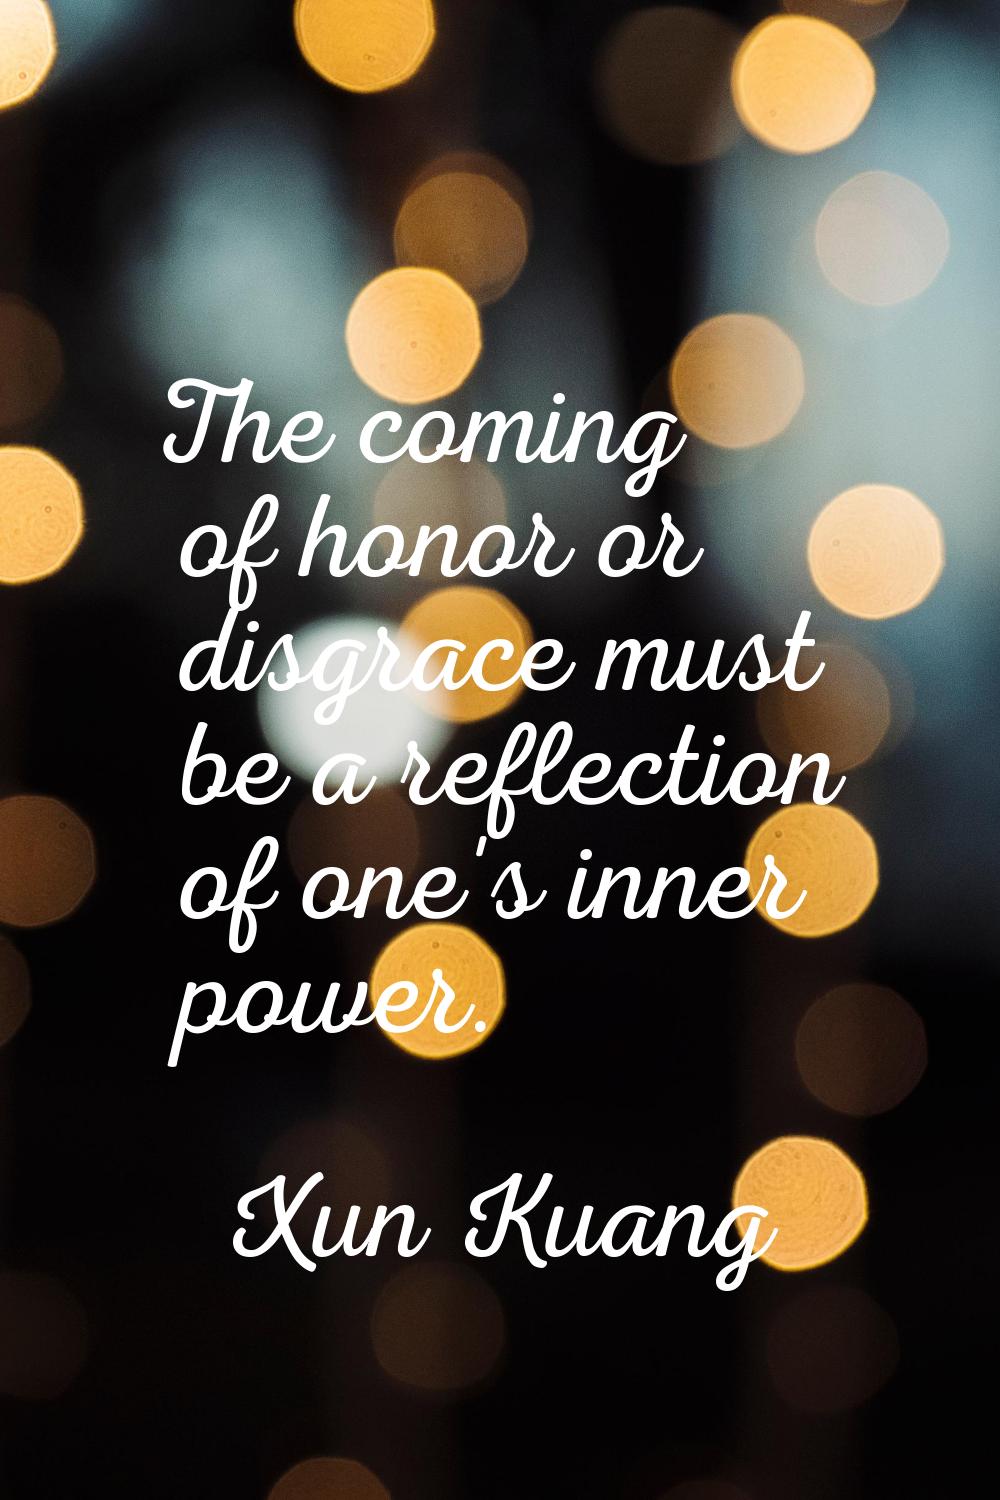 The coming of honor or disgrace must be a reflection of one's inner power.